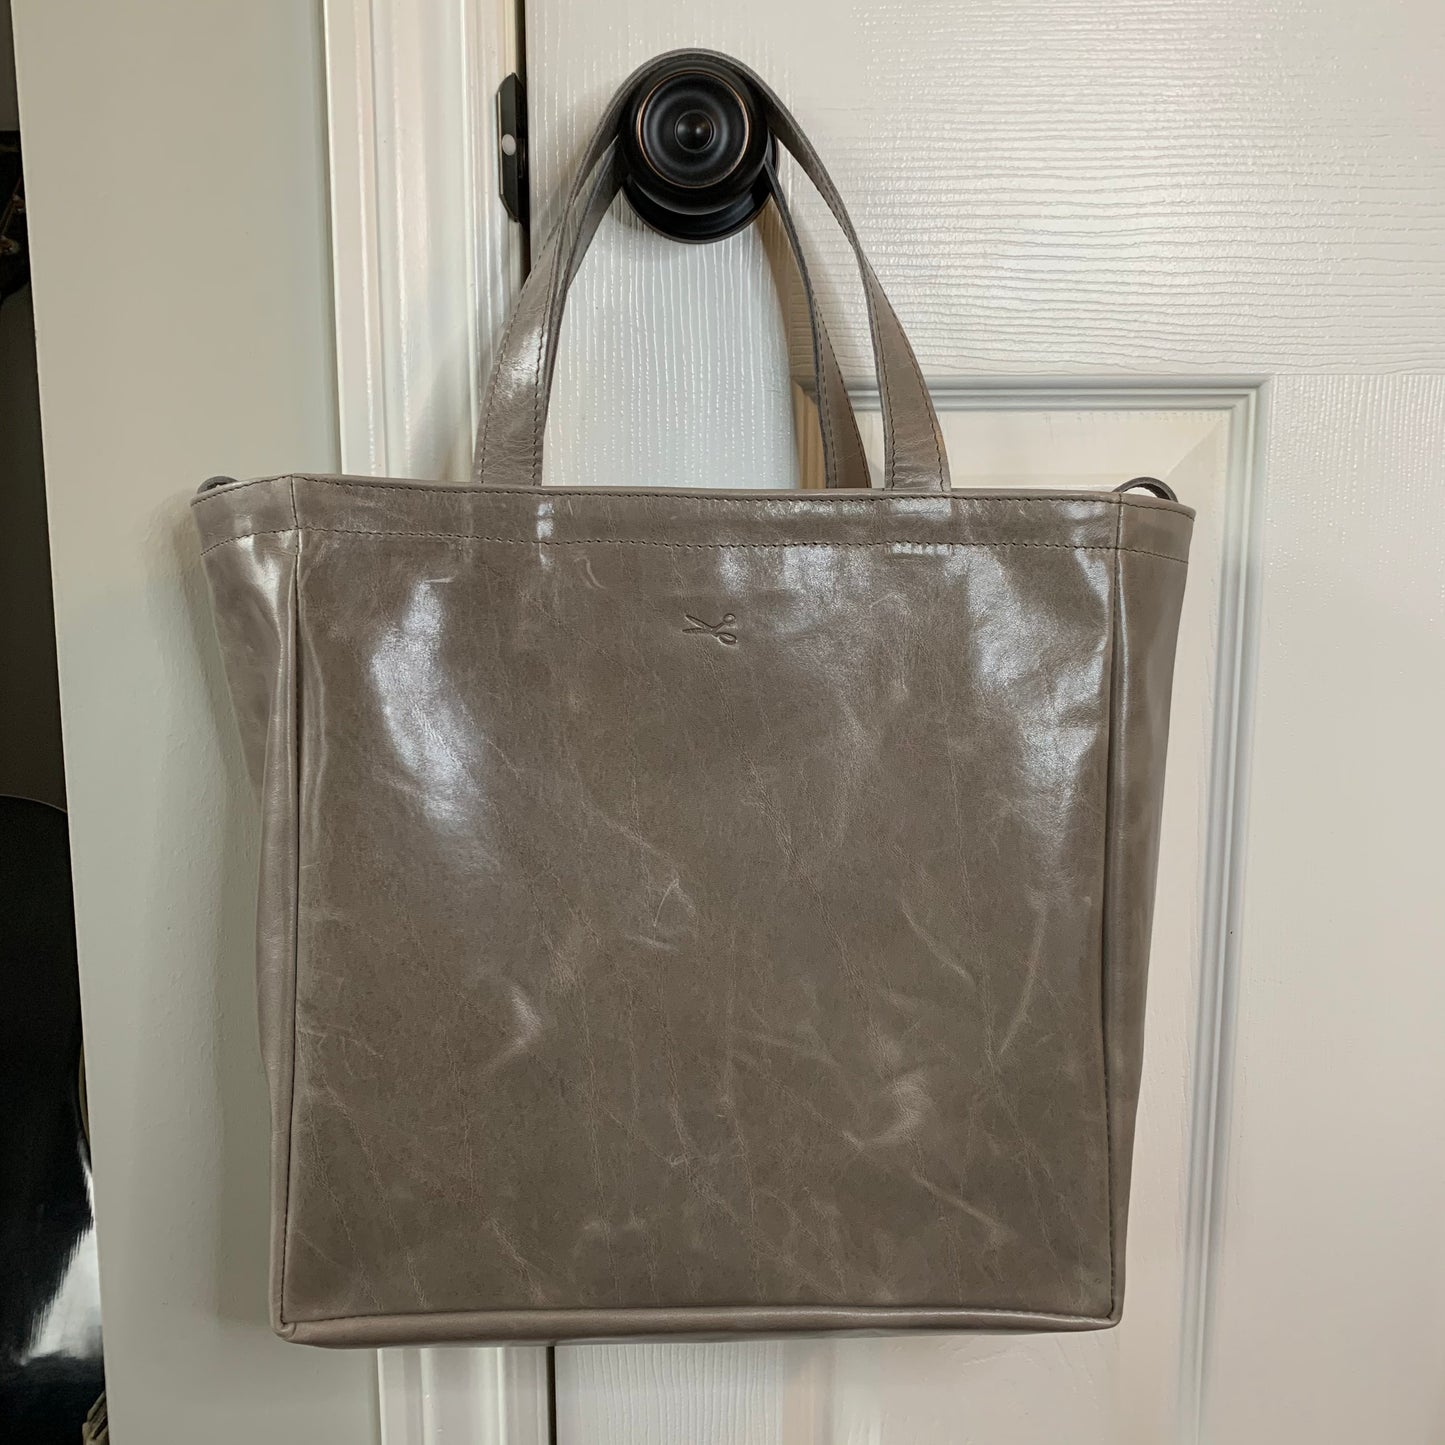 Small Leather Tote Bag